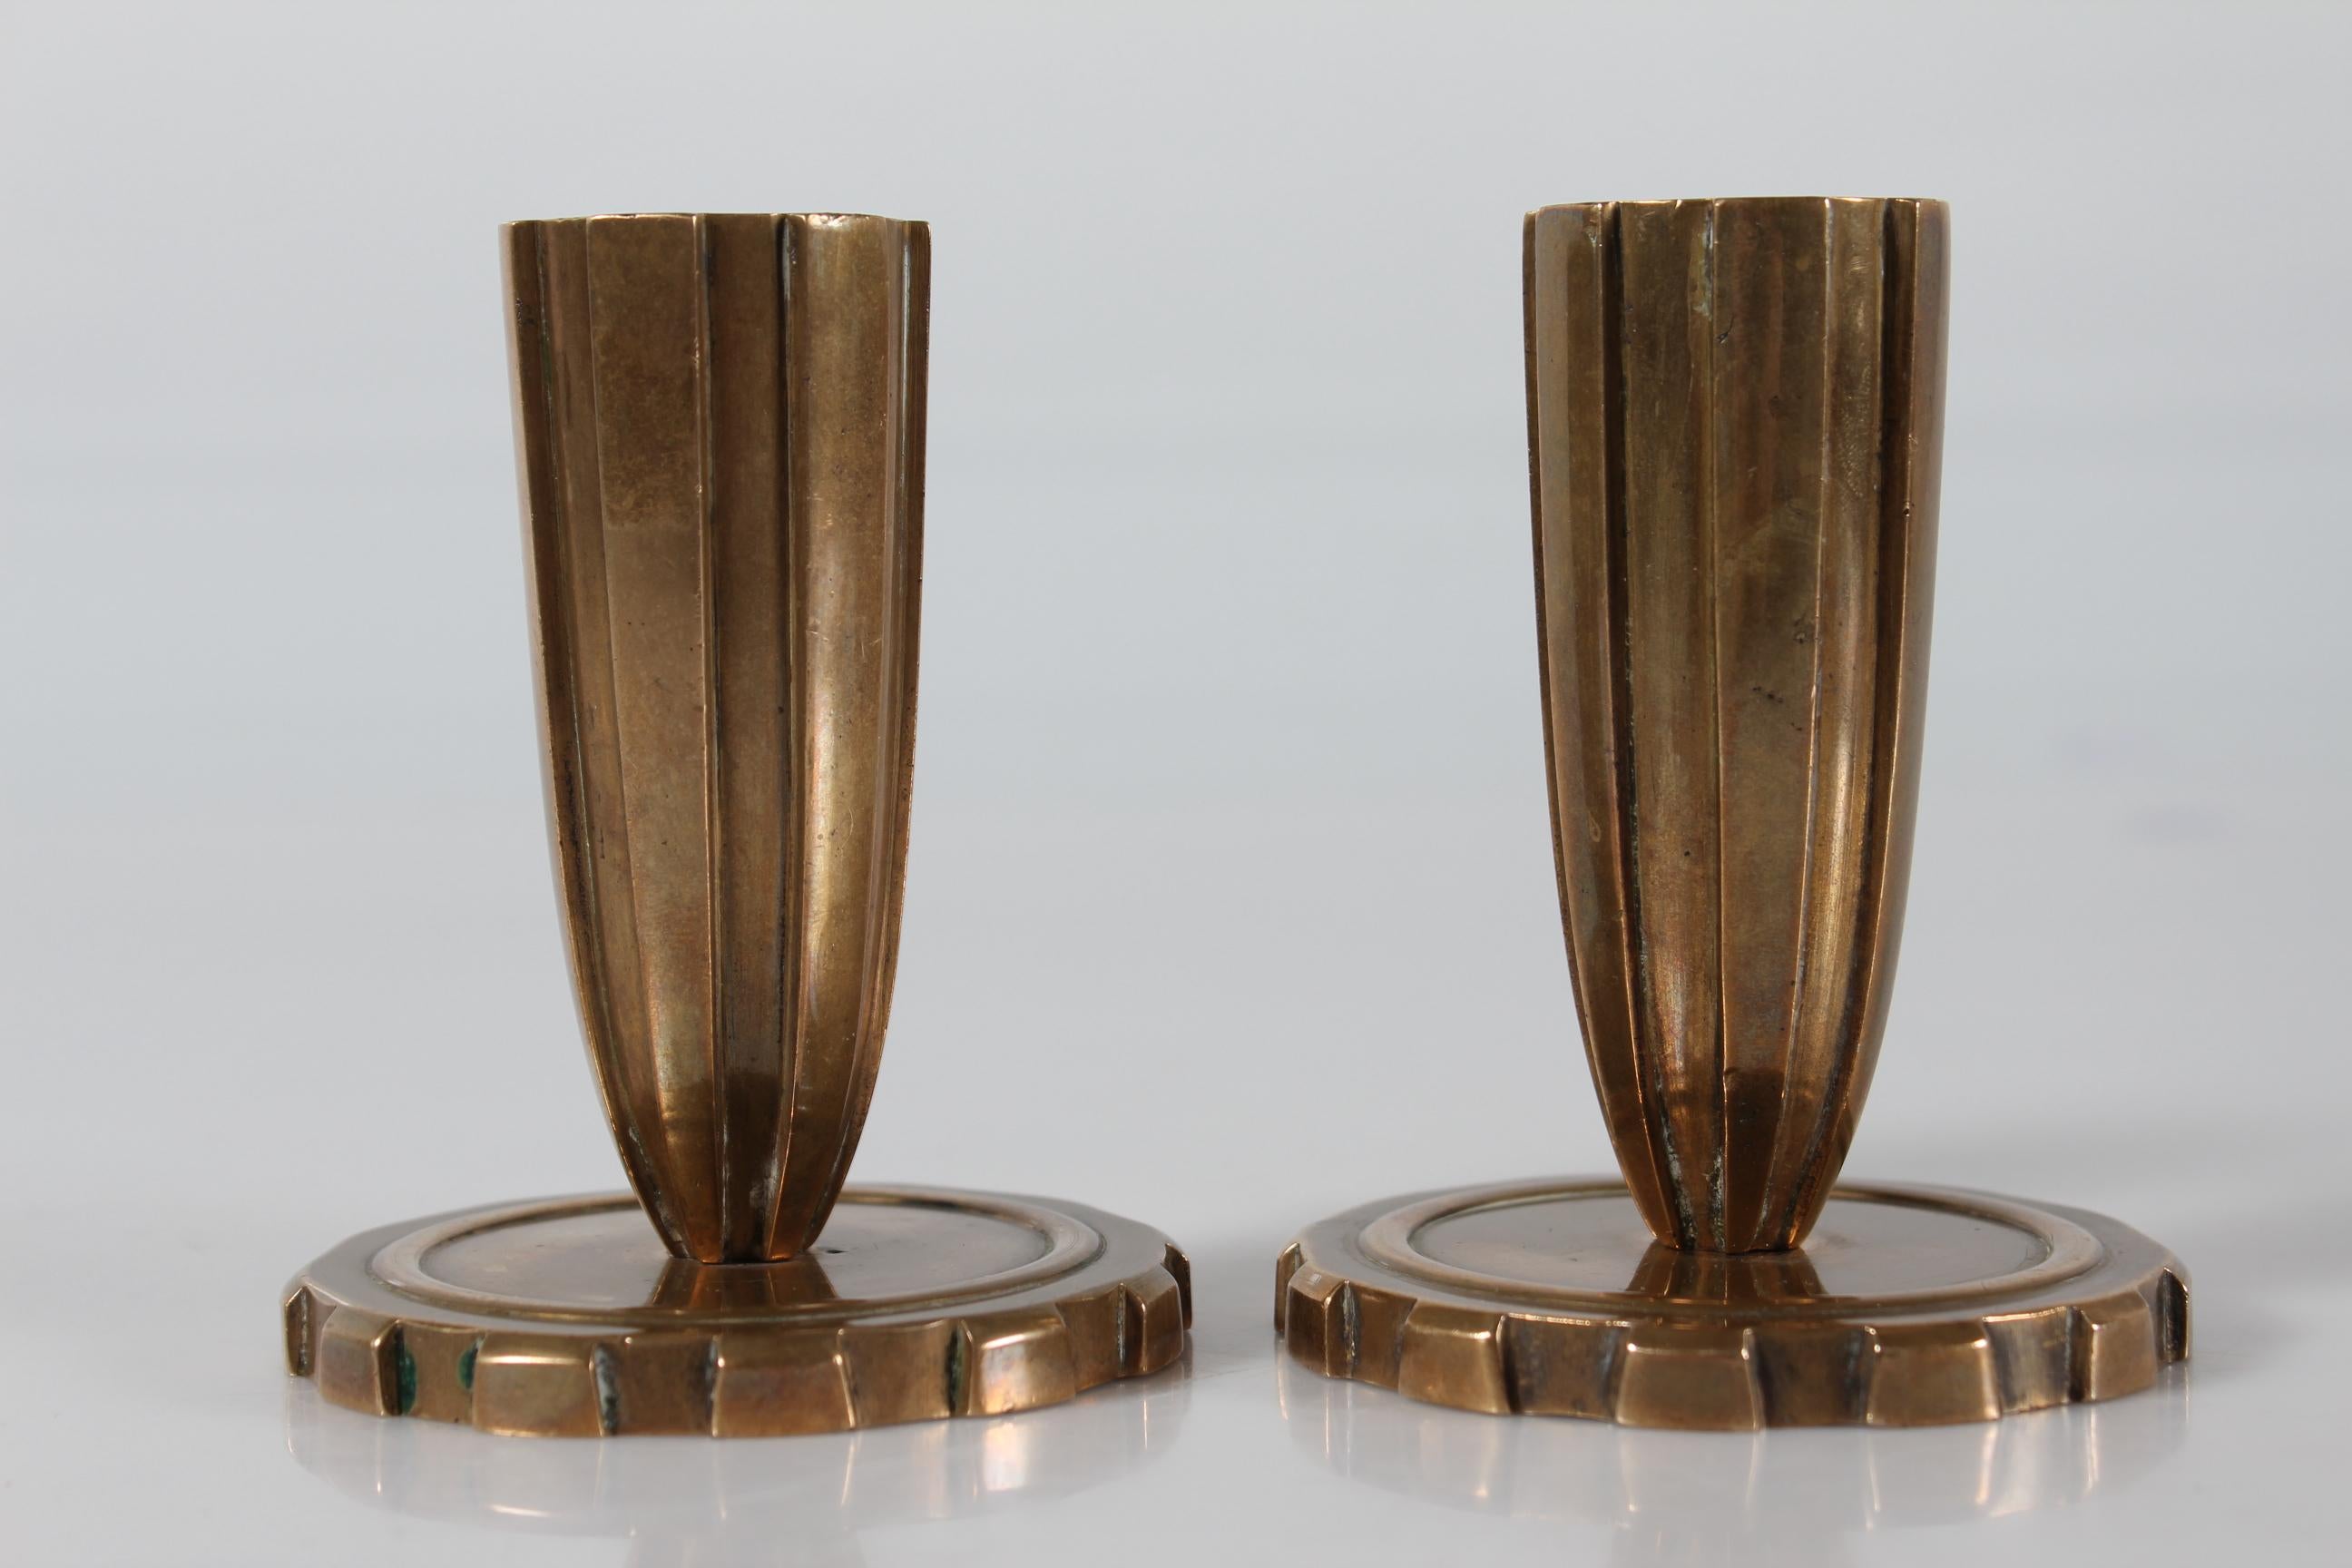 A pair of Danish Art Deco Tino candlesticks made of solid bronze in fluted style
Designed and made in Denmark 1930-1950.

Very nice used condition with good patina.